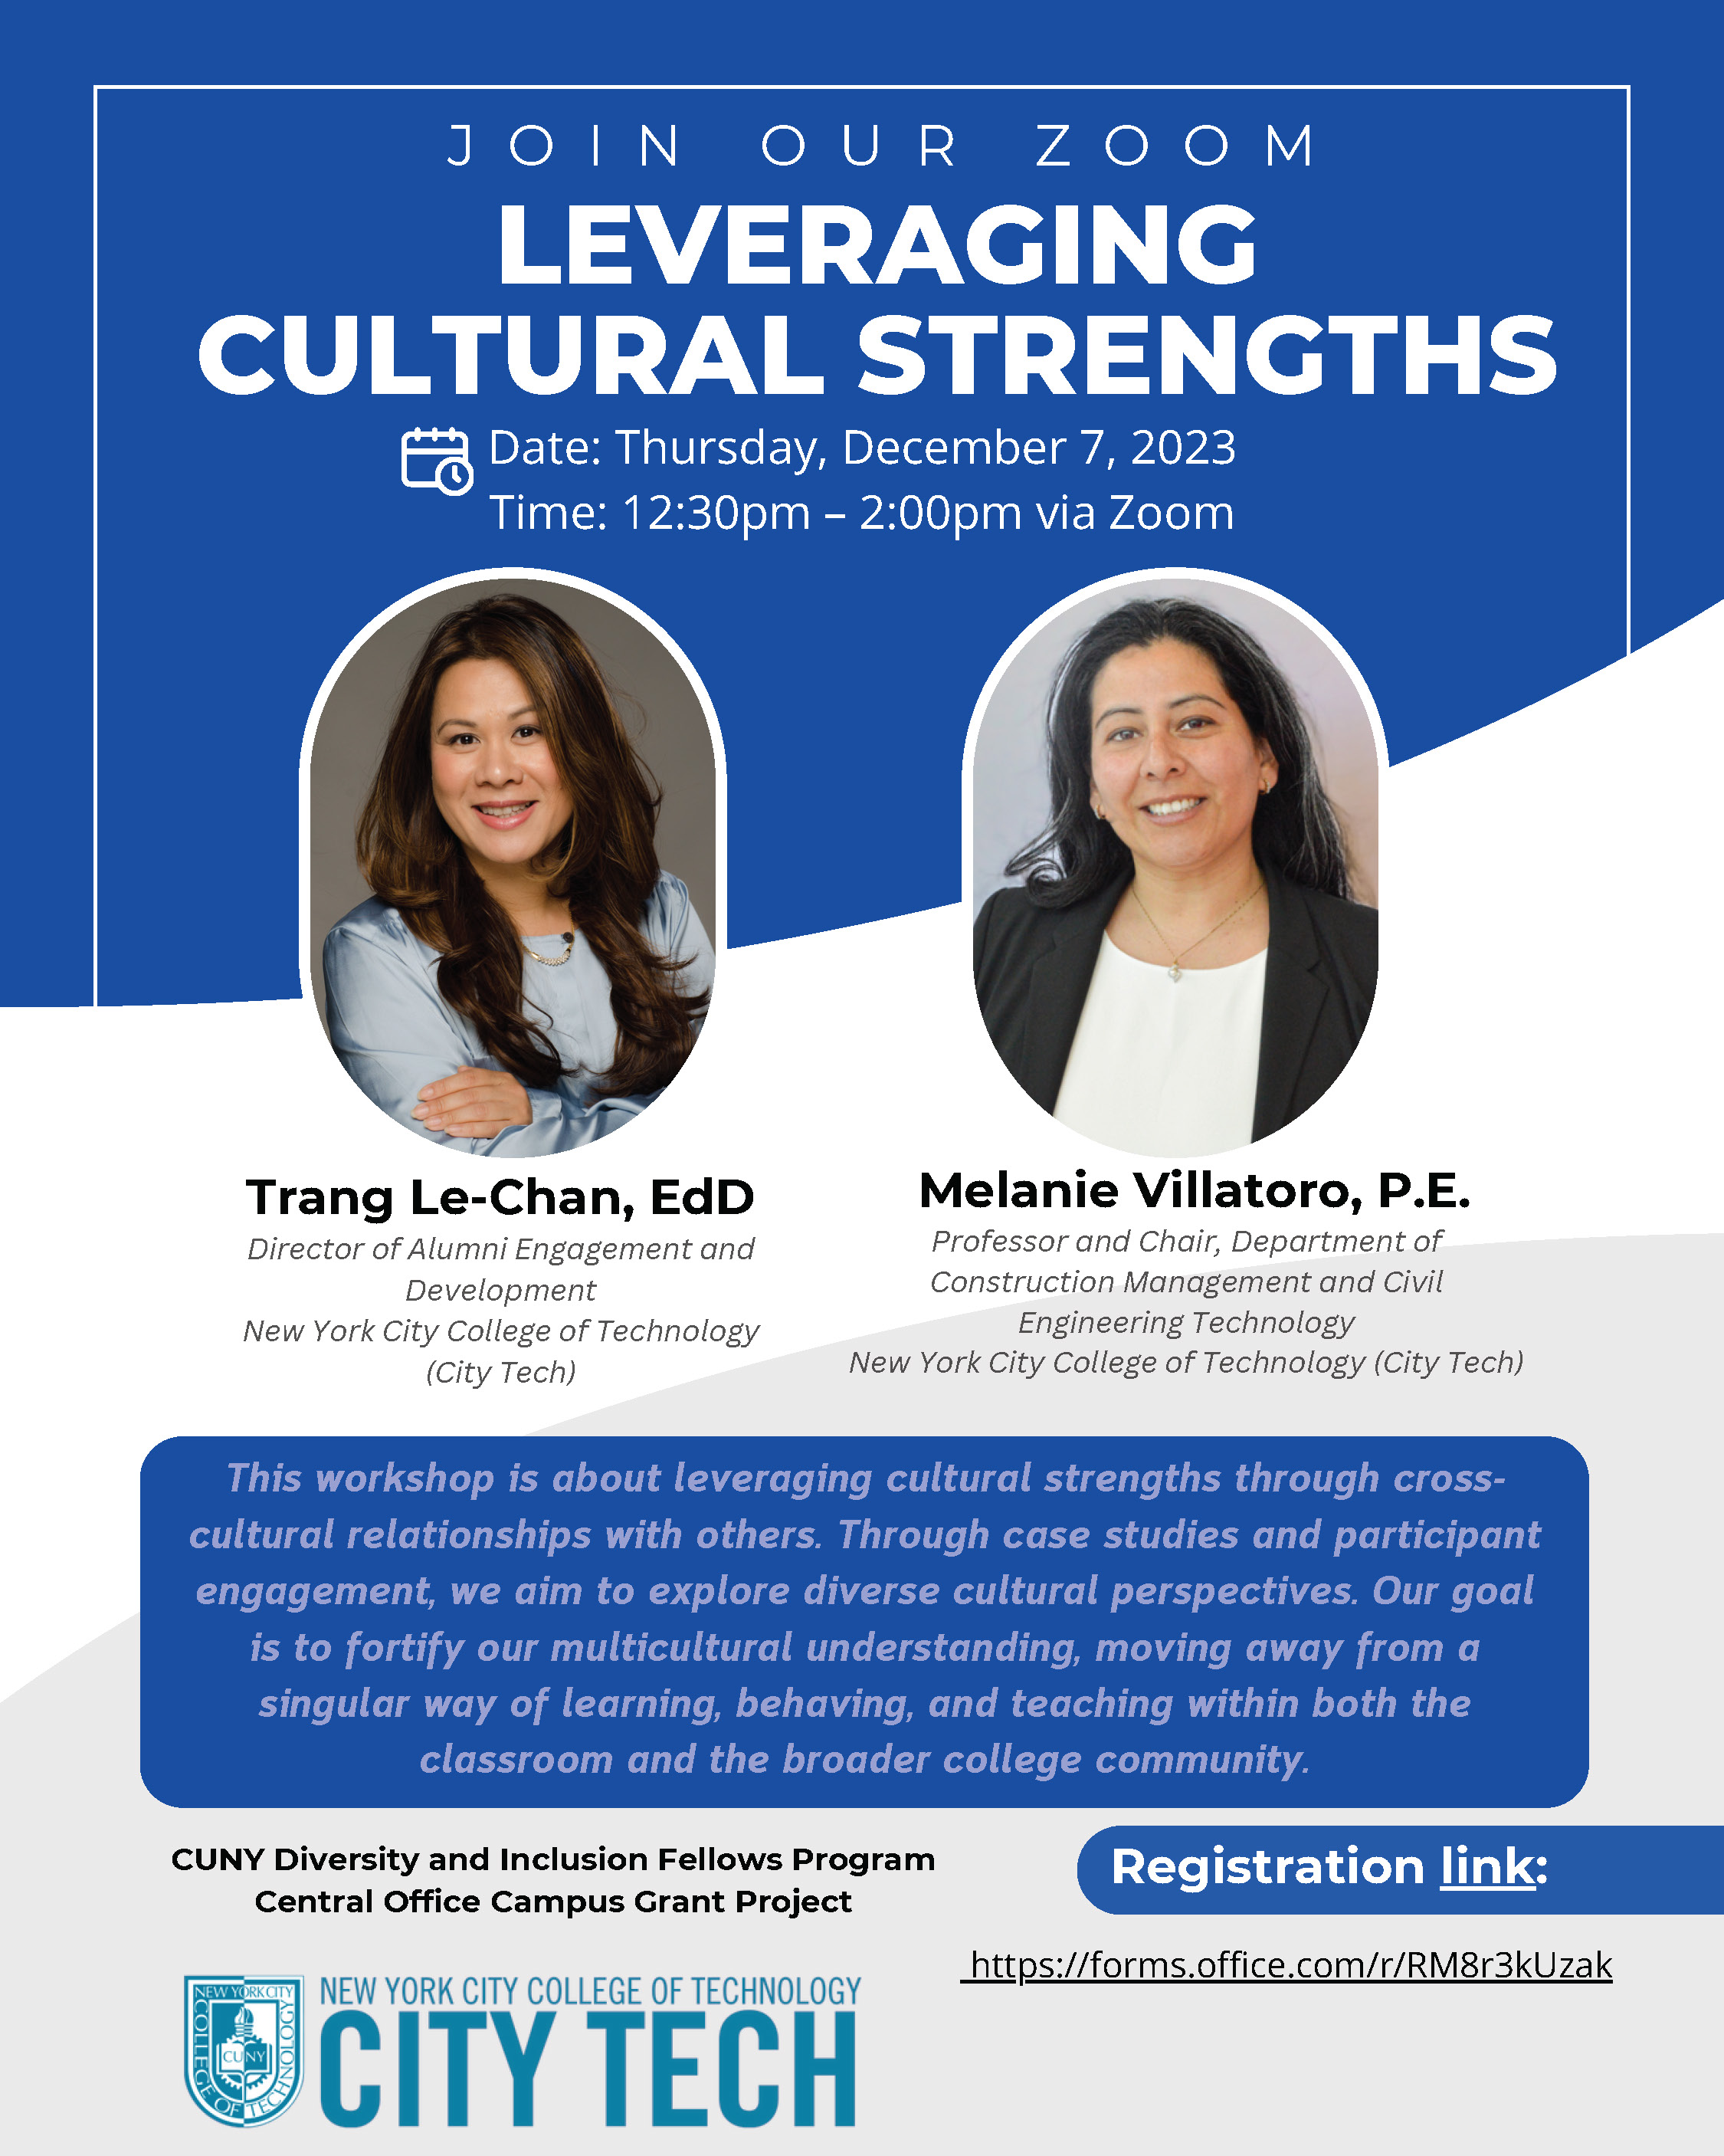 Leveraging Cultural Strengths